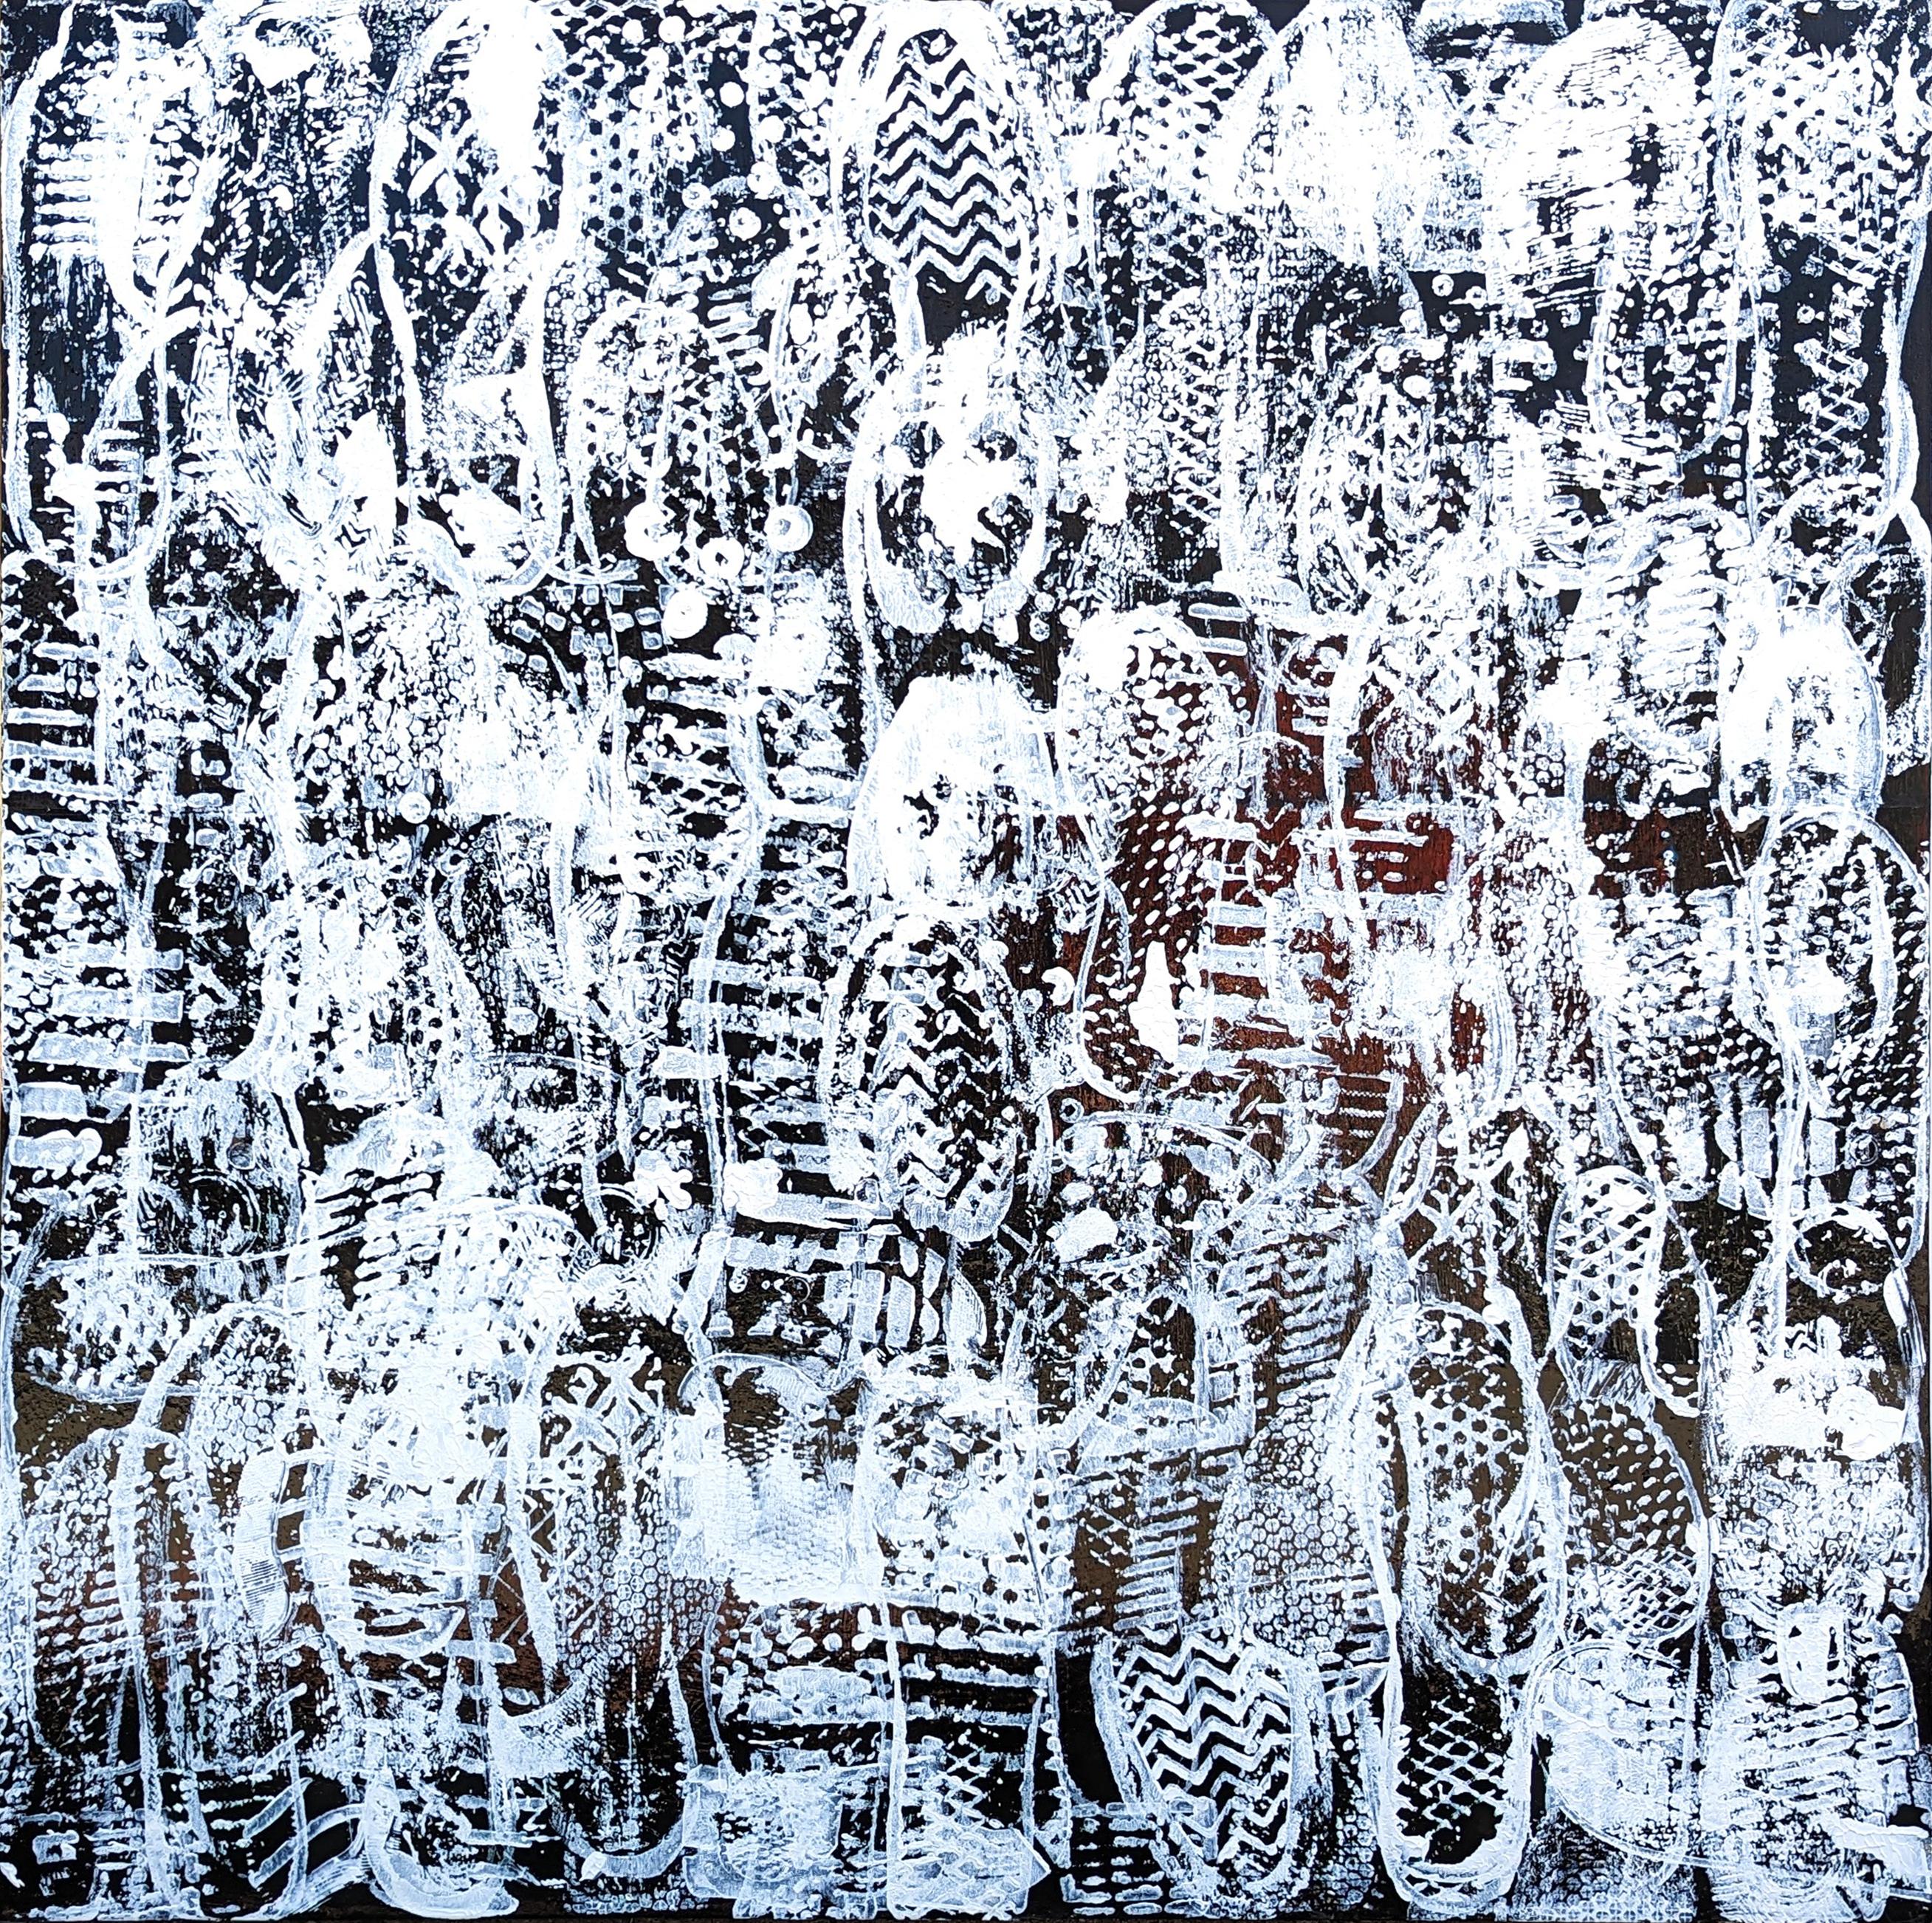 Tra' Slaughter Abstract Painting - “Soul Traffic” Contemporary Black and White Longitudinal Painting with Texts